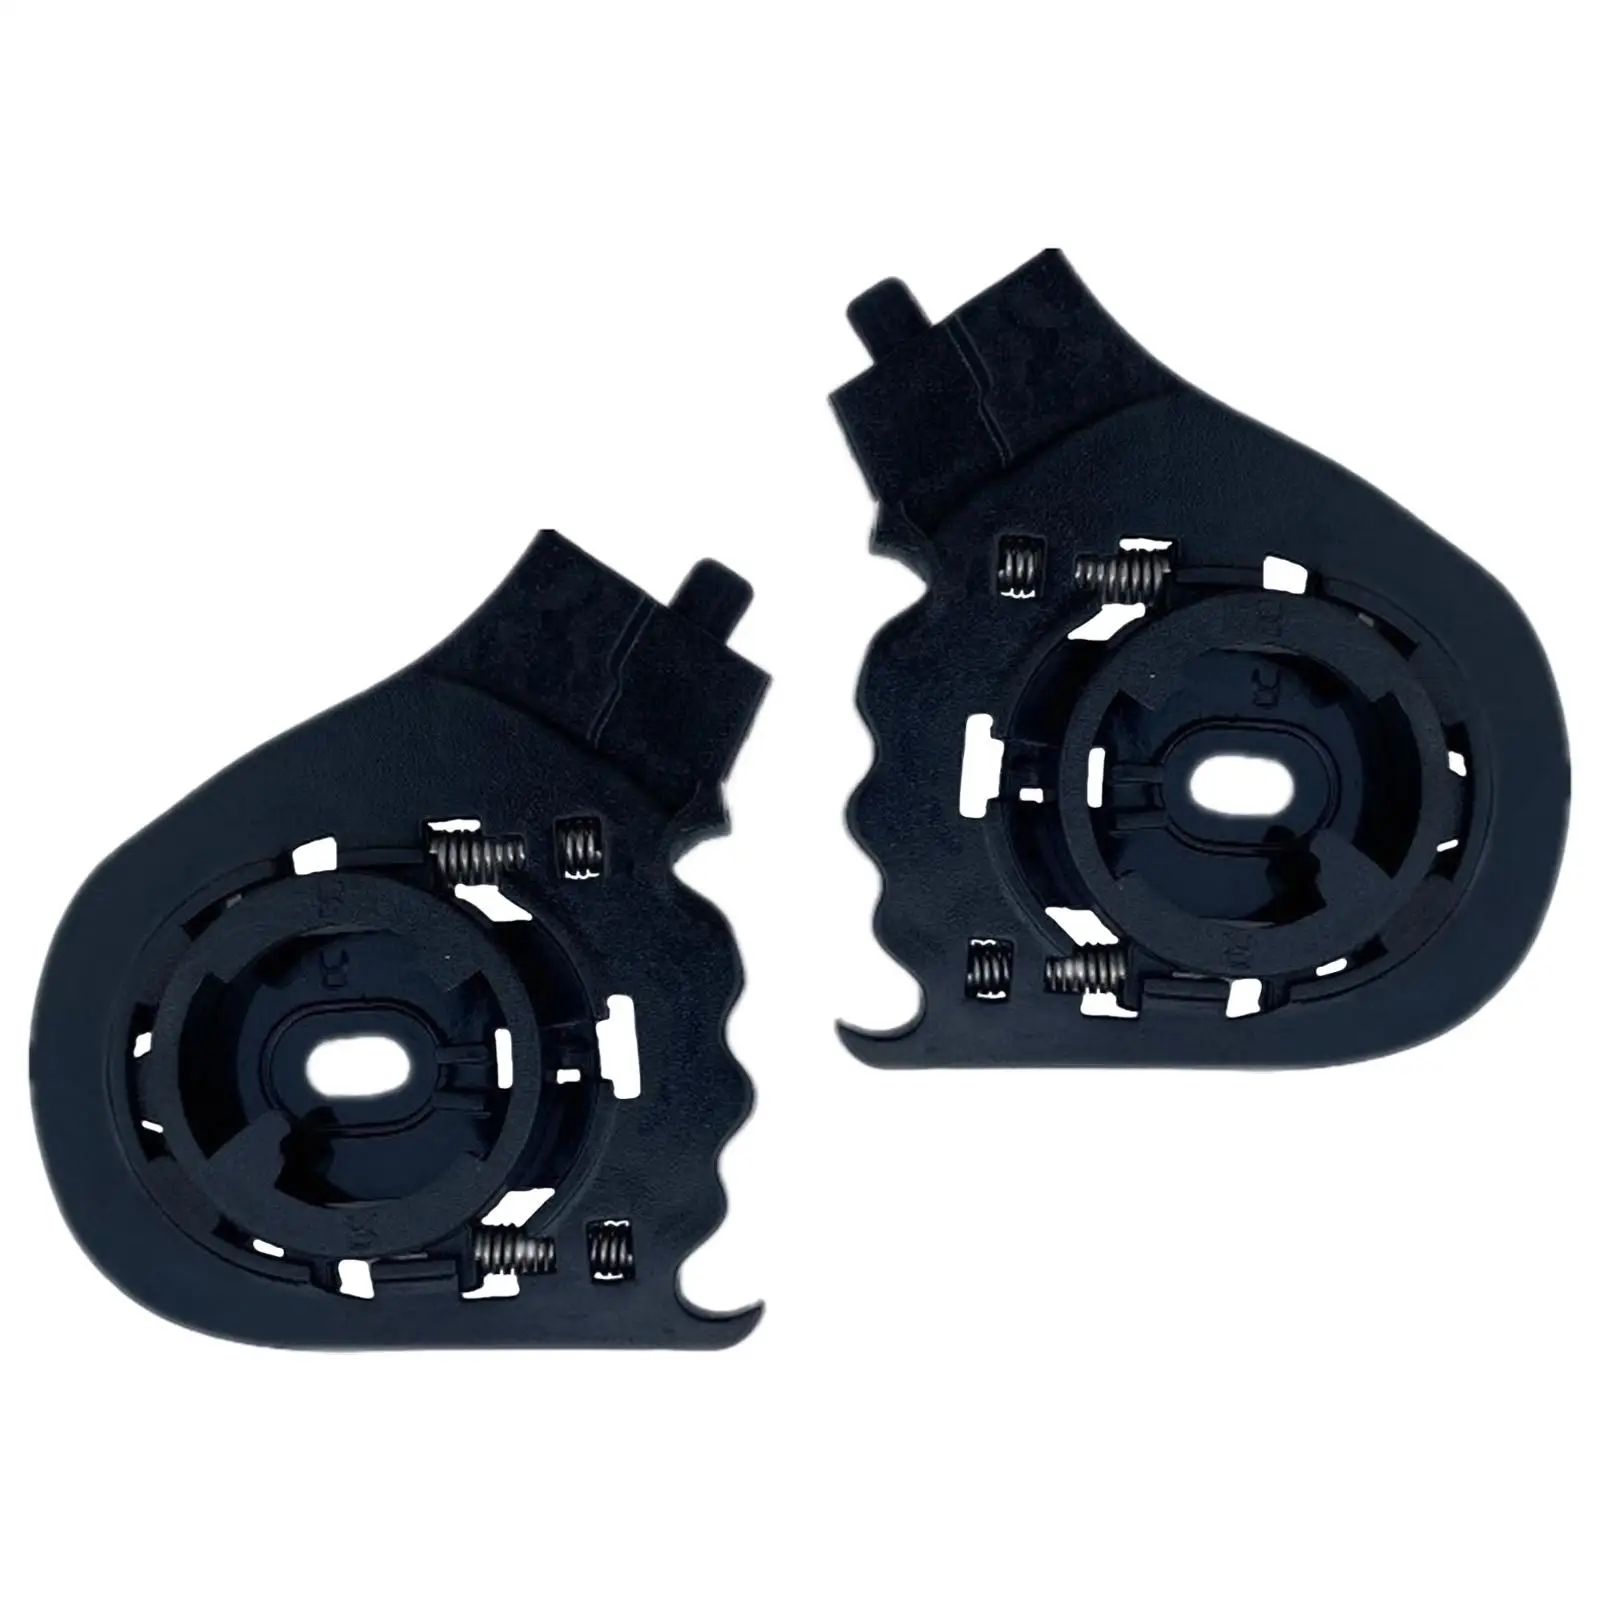 2Pcs Motorbike  , Replacement  Fits for  OF569 OF578  Visor Accessories Repair Tools Mounts Parts